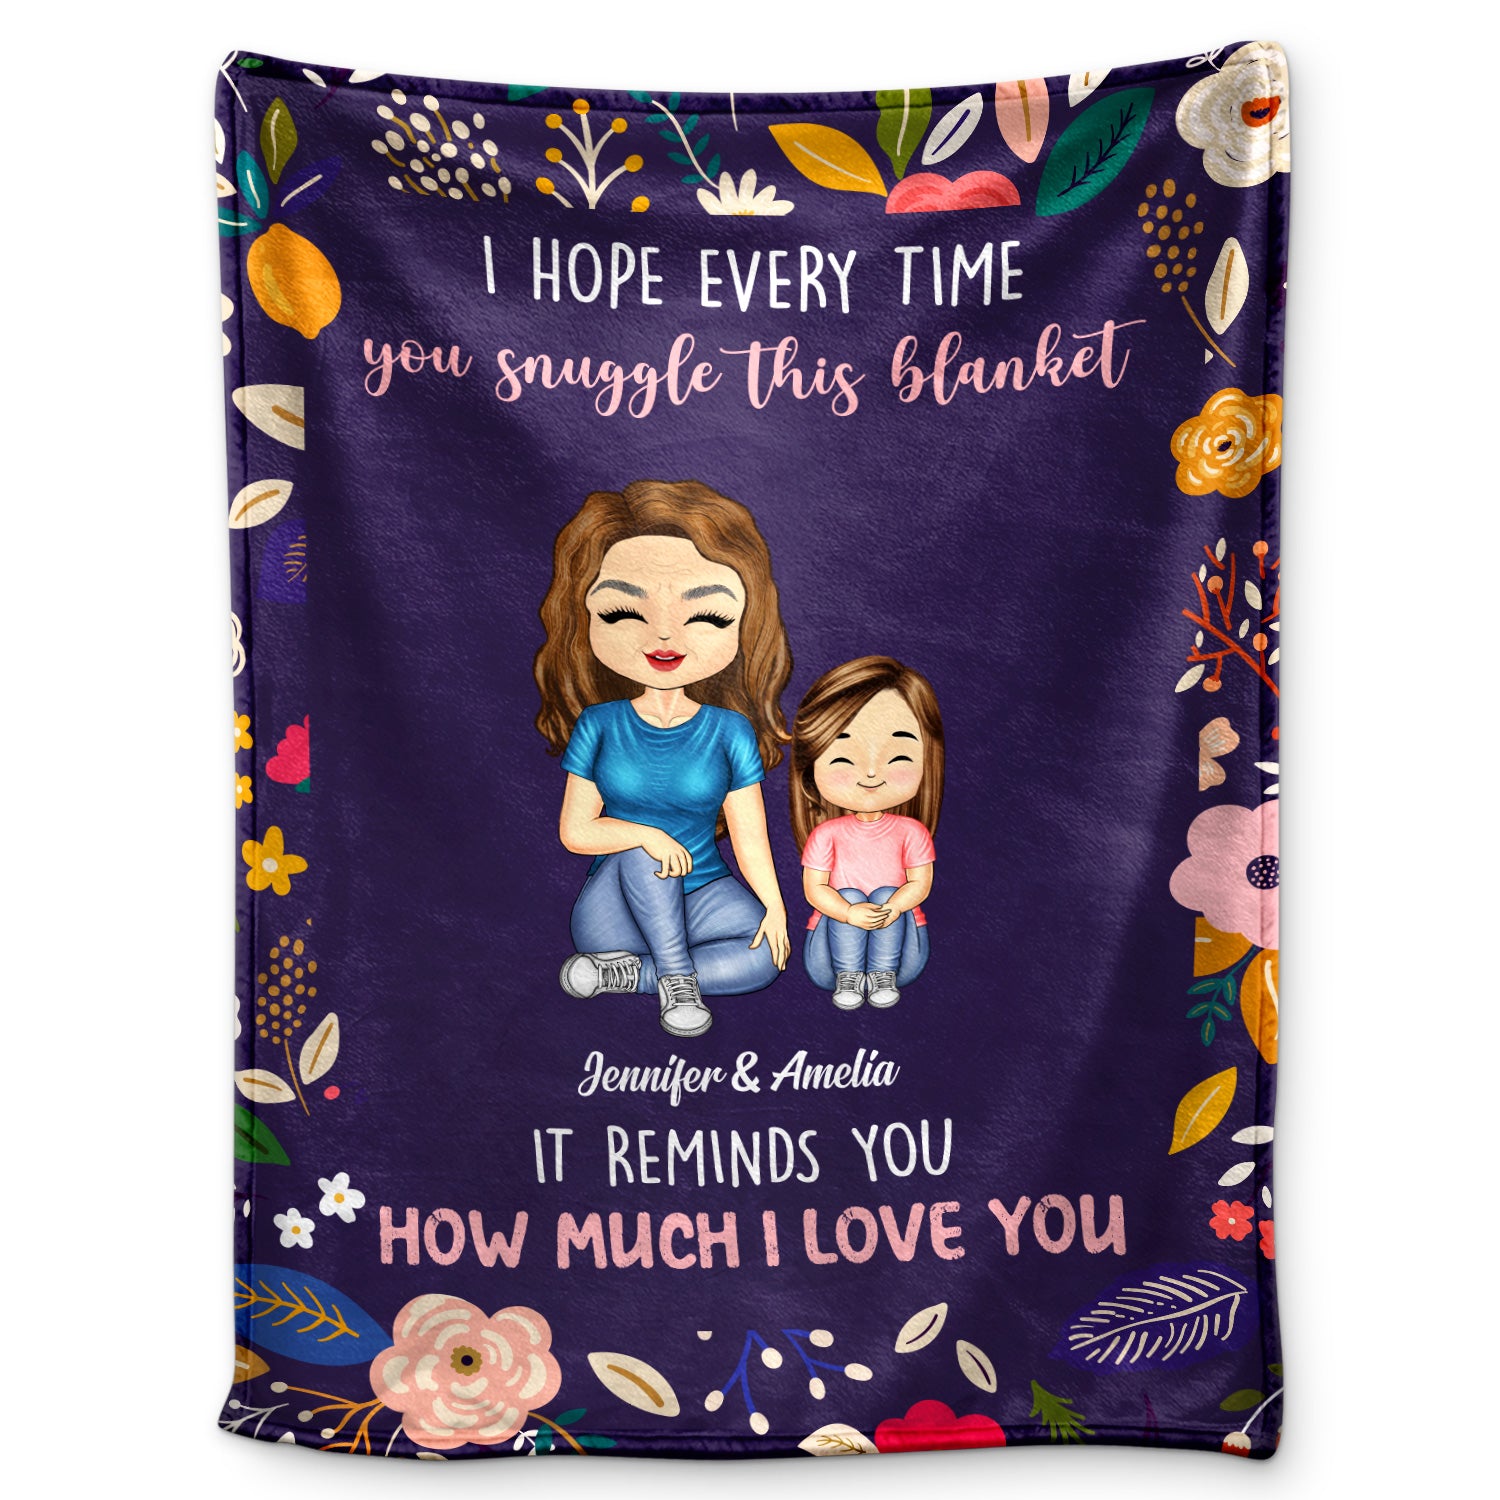 Grandparents Reminds You How Much I Love You - Gift For Grandkids, Grandparents - Personalized Fleece Blanket